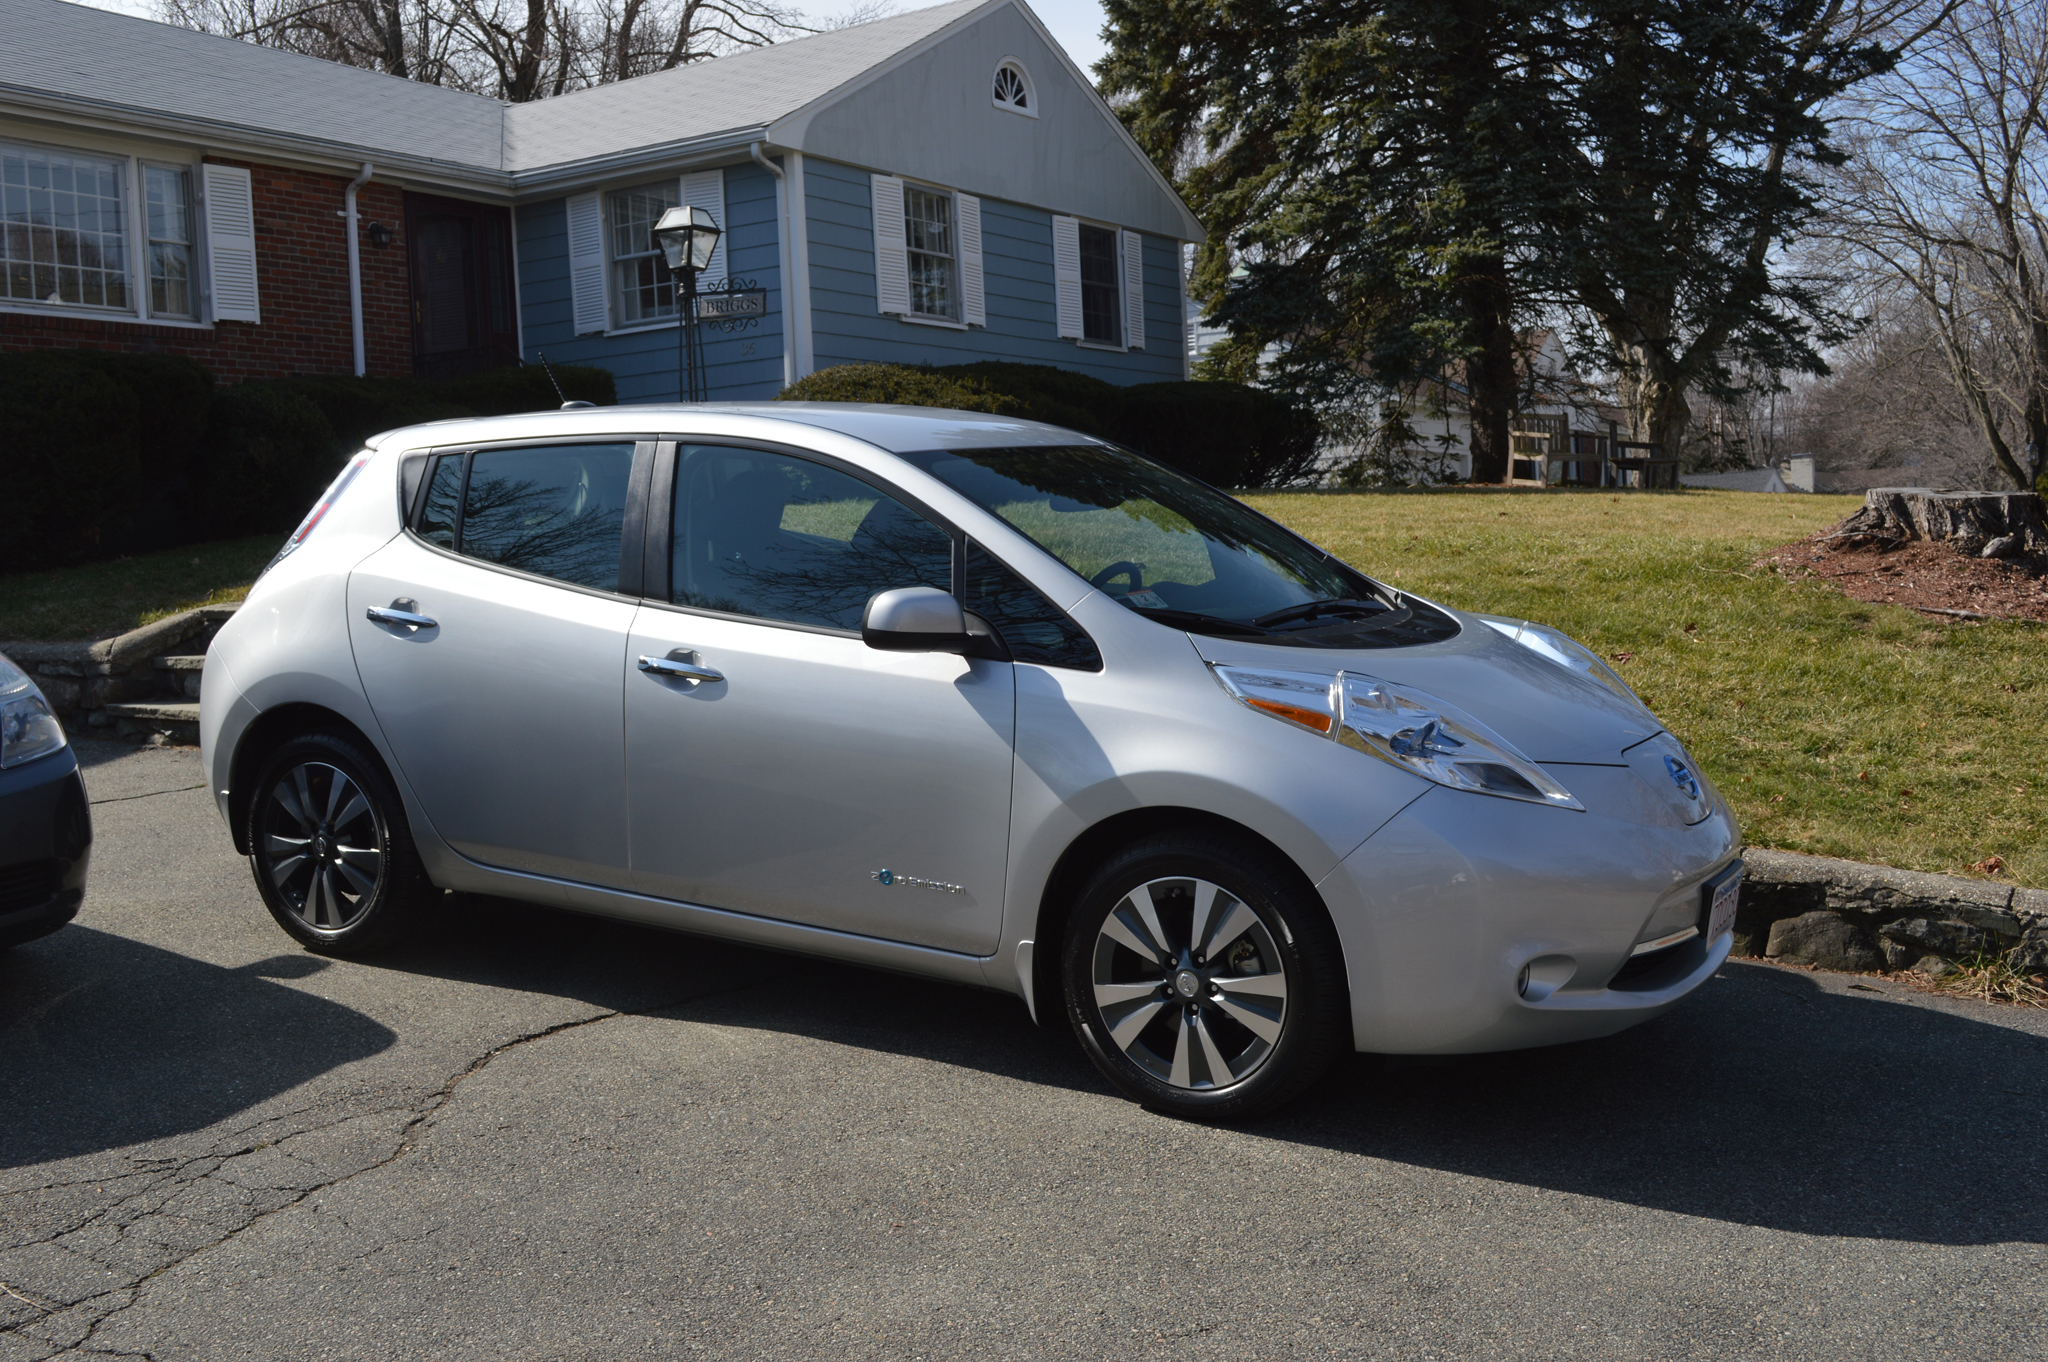 How much does a nissan leaf cost per mile